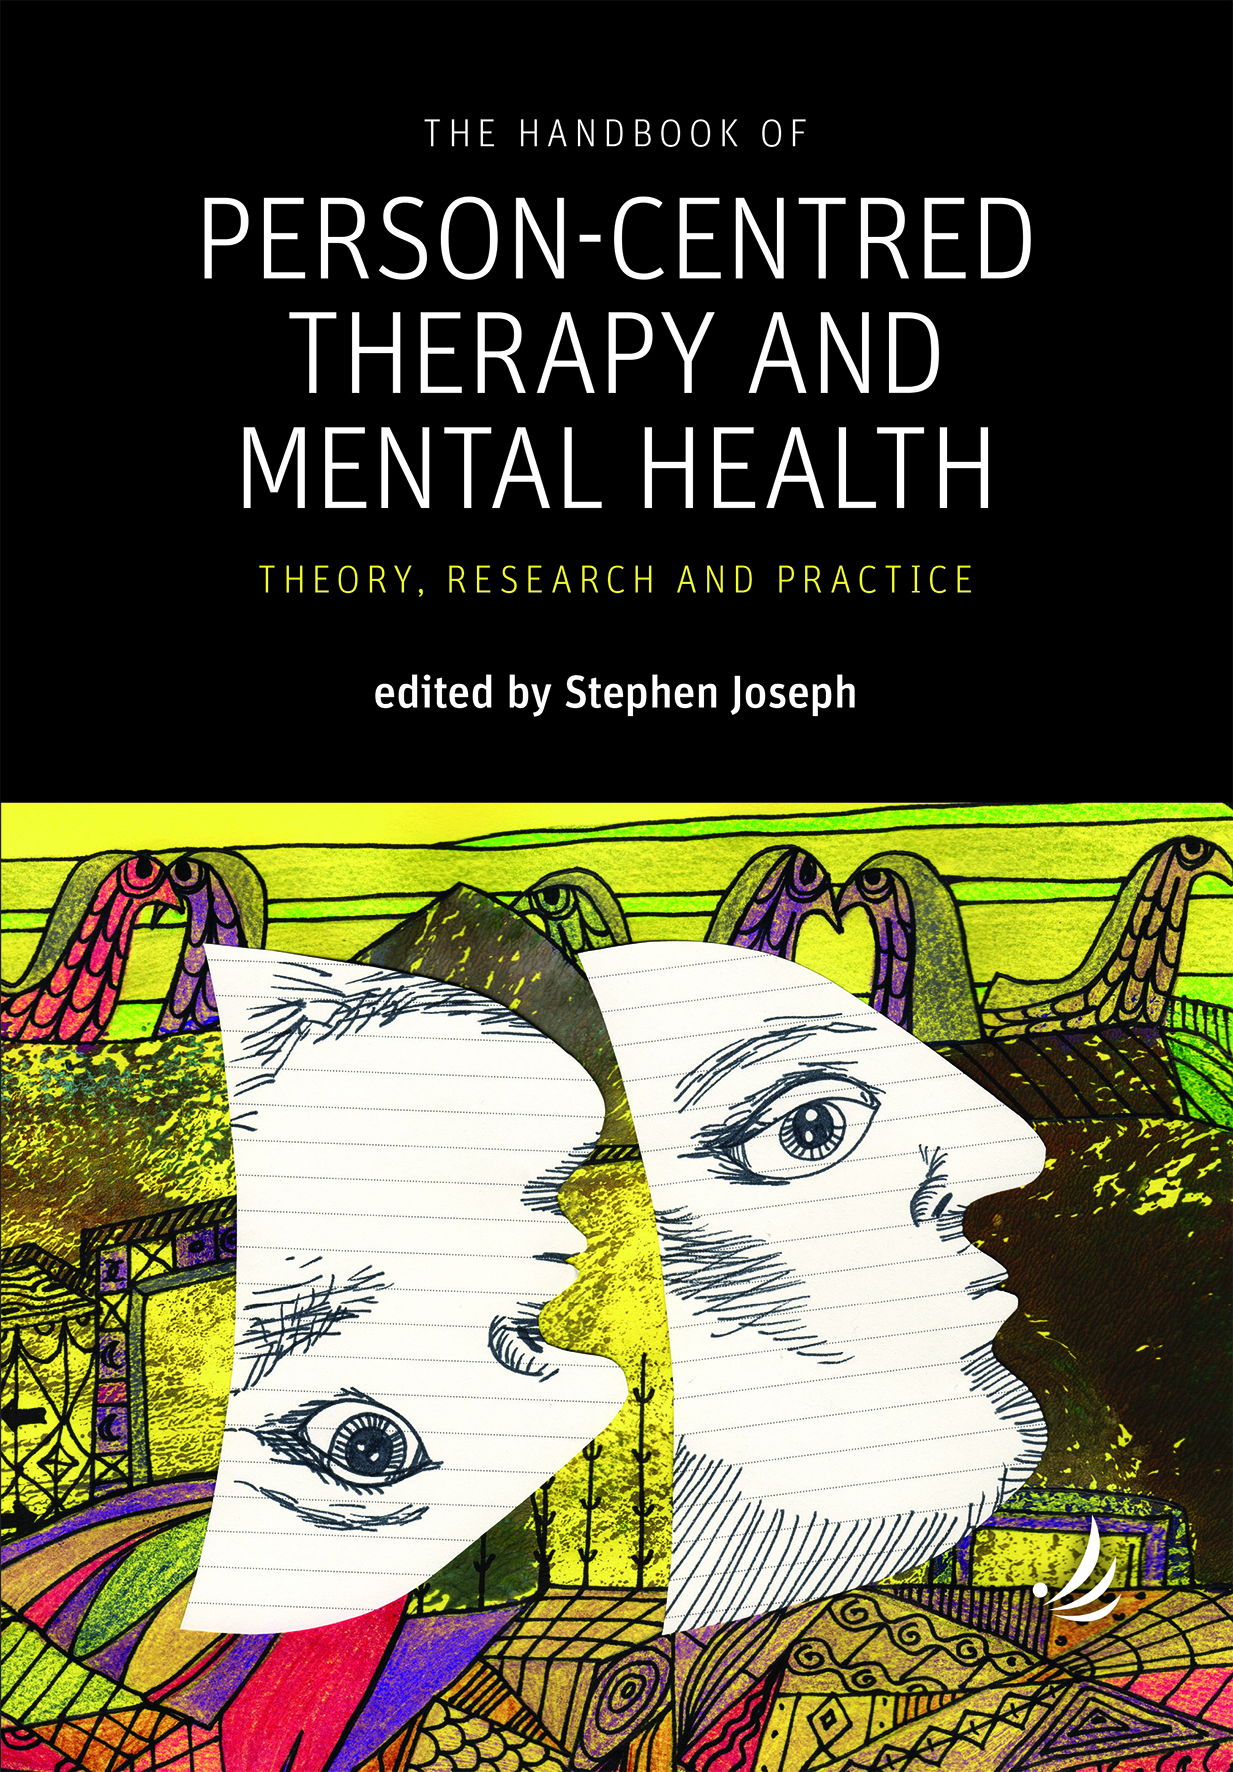 Rethinking Human Suffering by Stephen Joseph - From Therapy Today May 2017